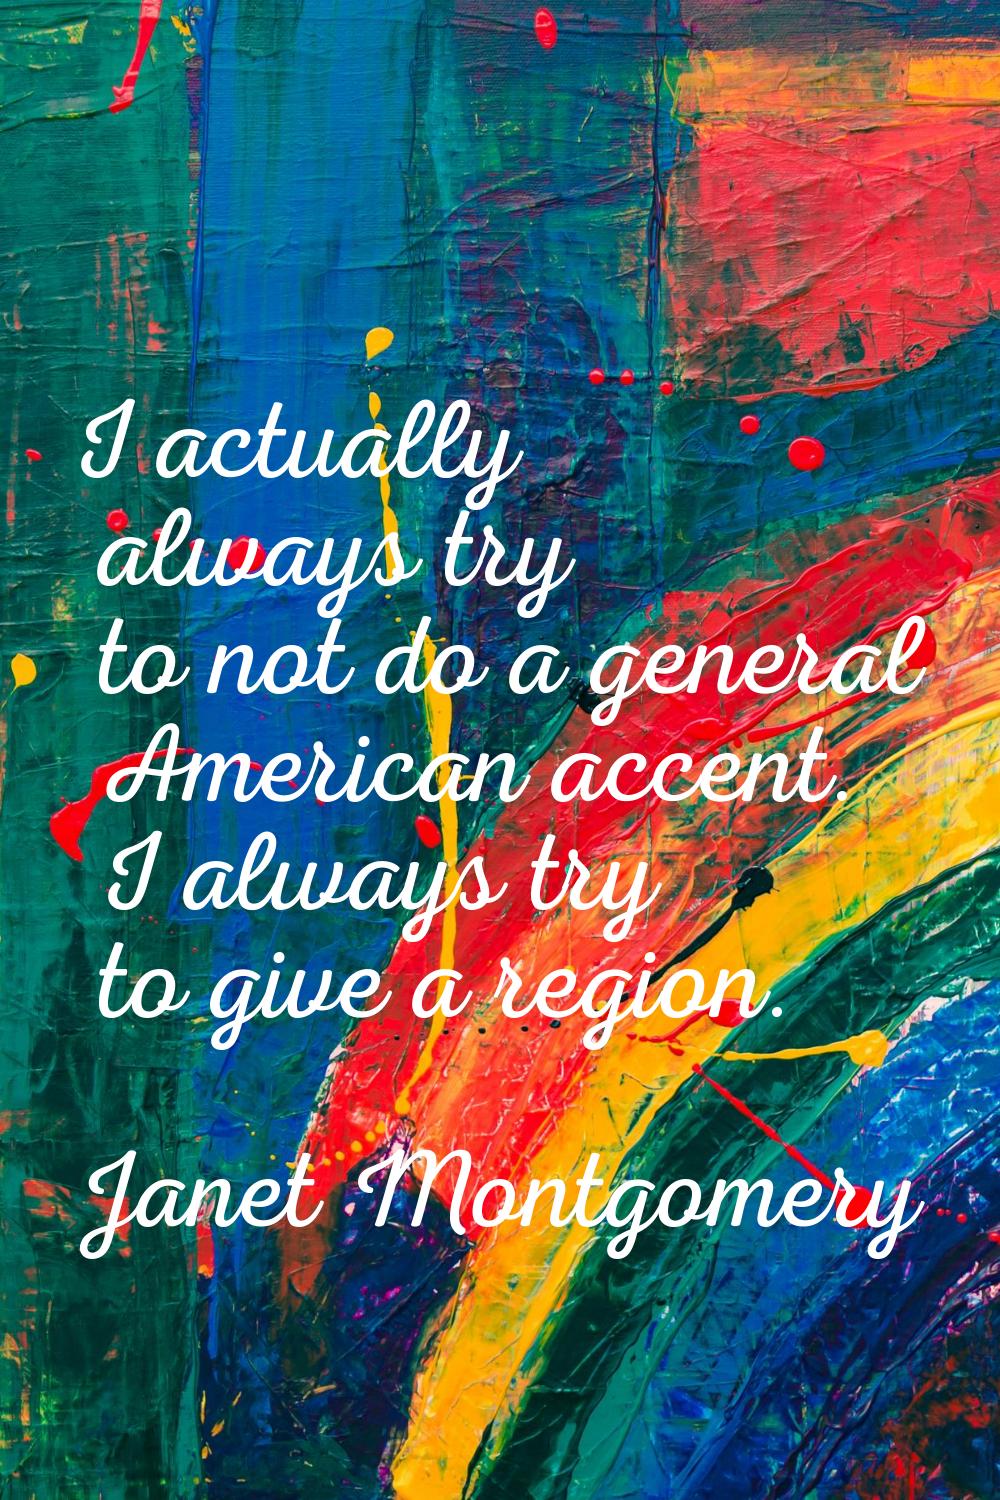 I actually always try to not do a general American accent. I always try to give a region.